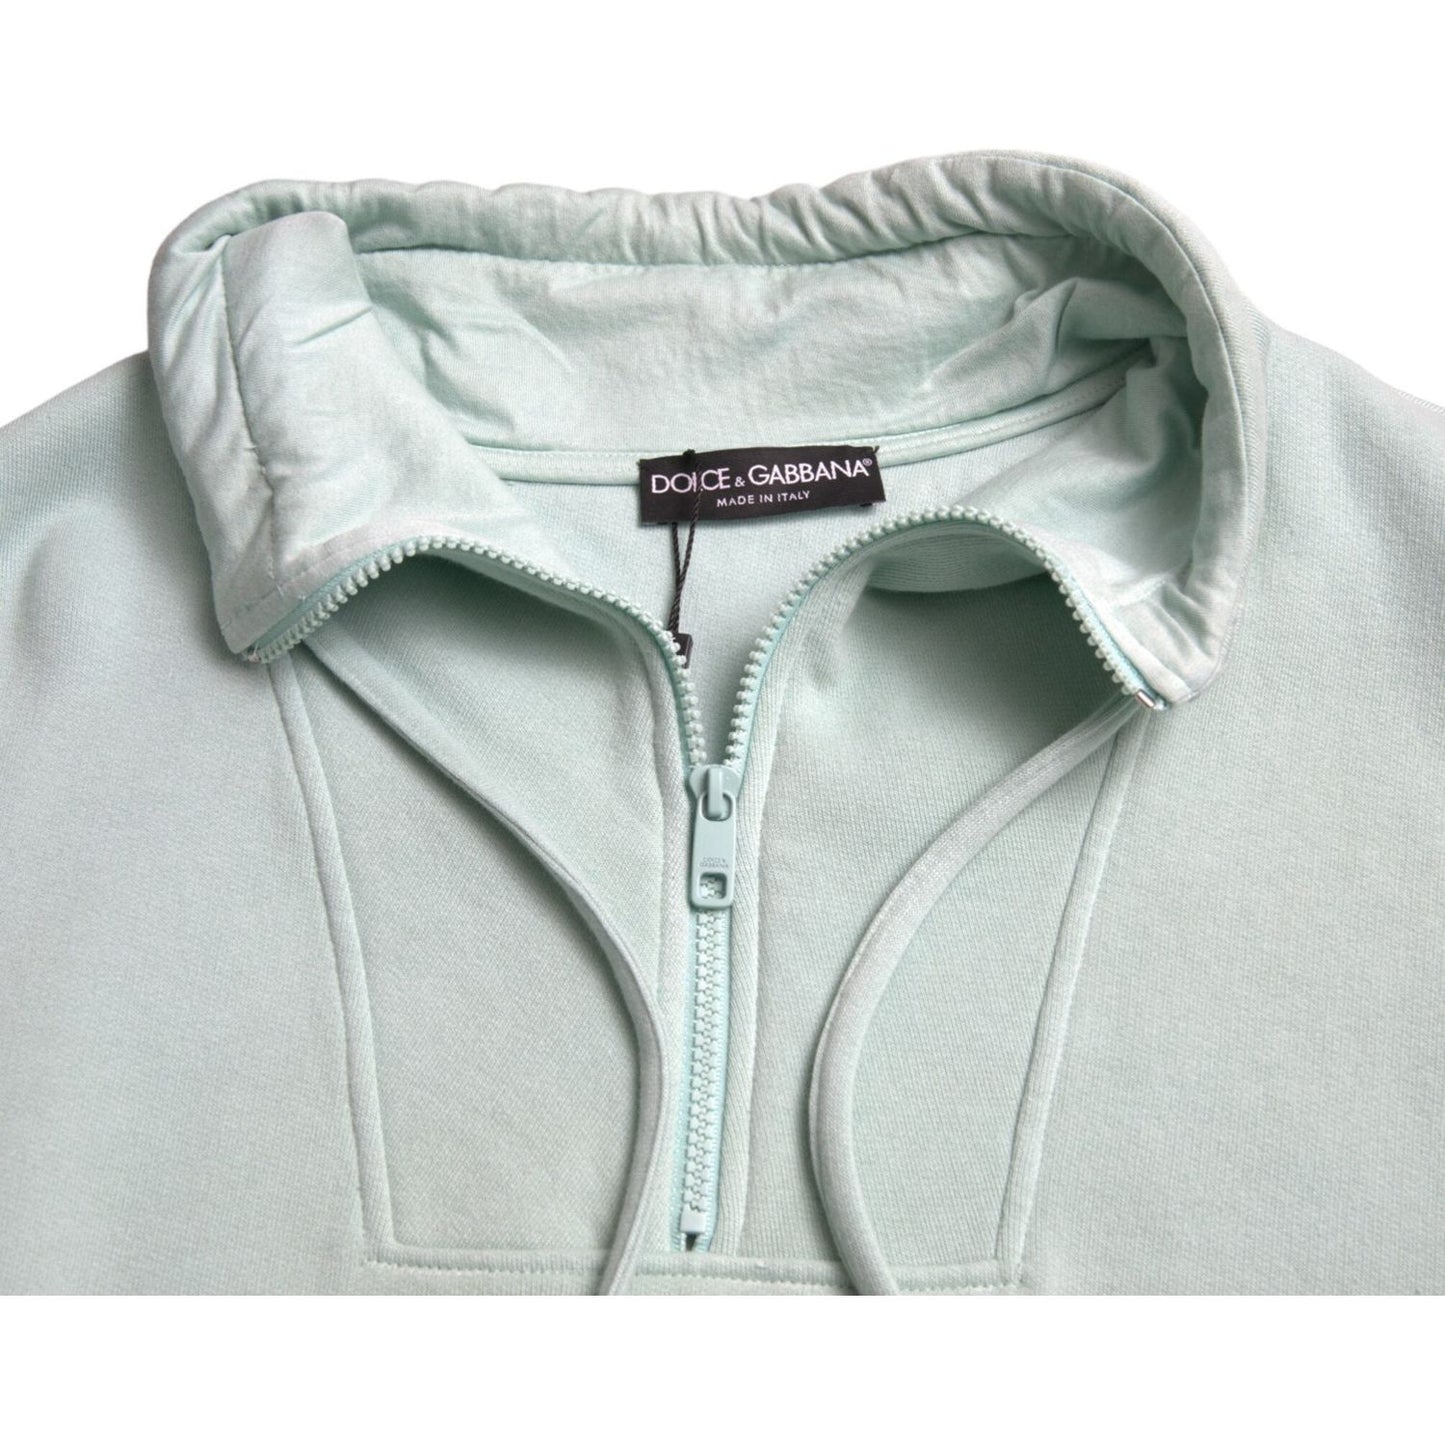 Dolce & Gabbana Chic Mint Green Pullover Sweater mint-green-cotton-pockets-pullover-sweater